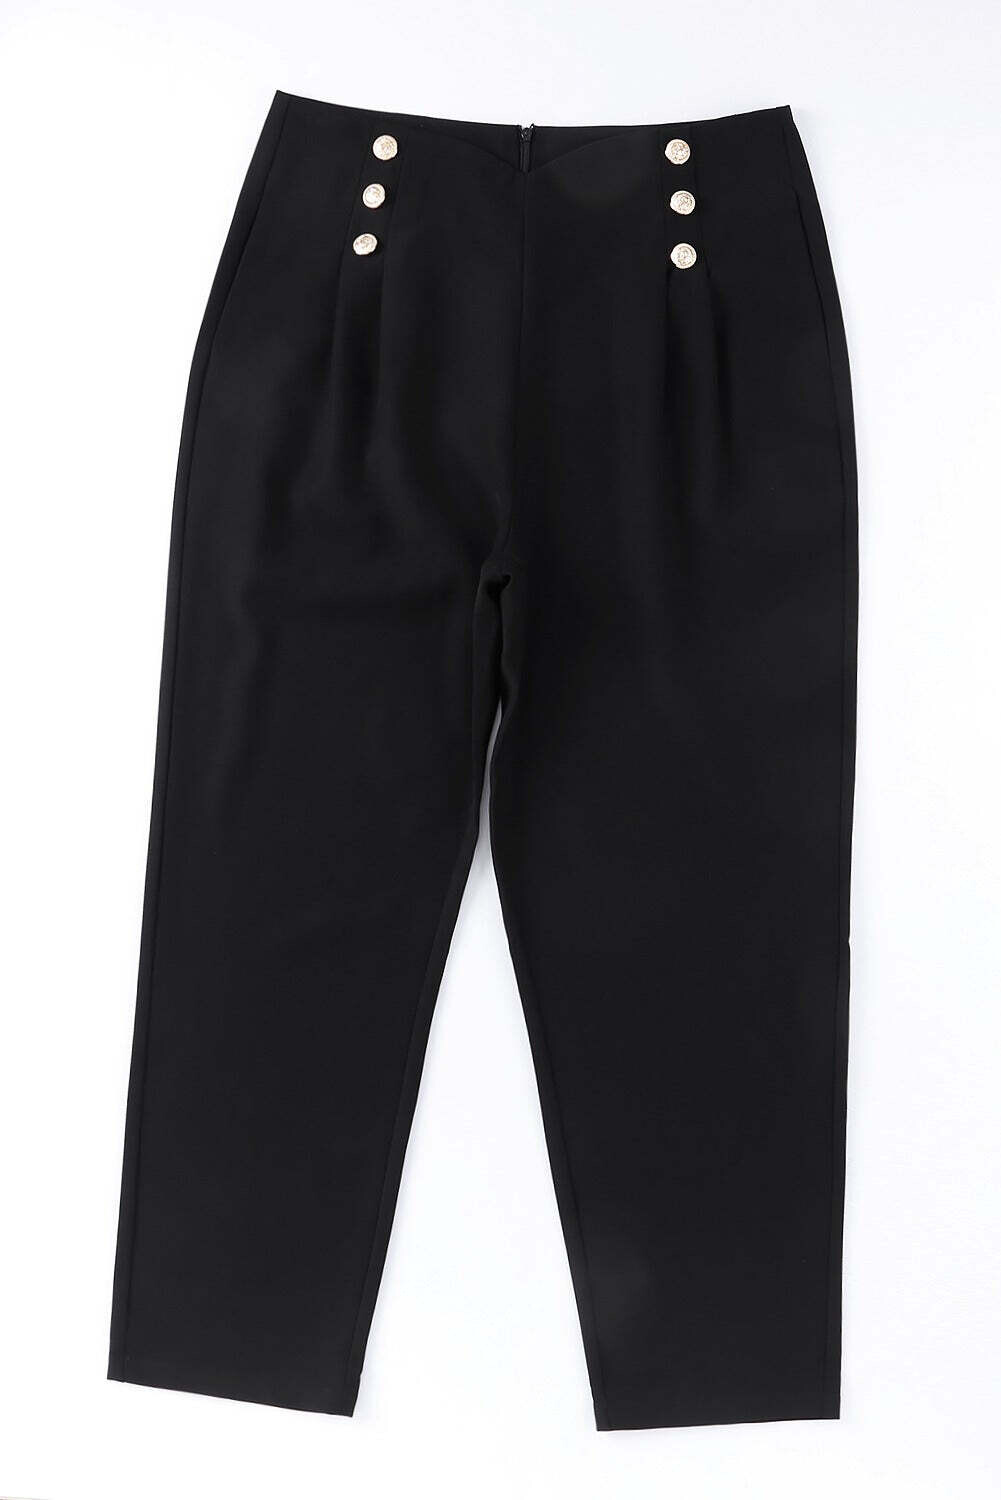 Double Breasted Pleated Casual Cropped Pants